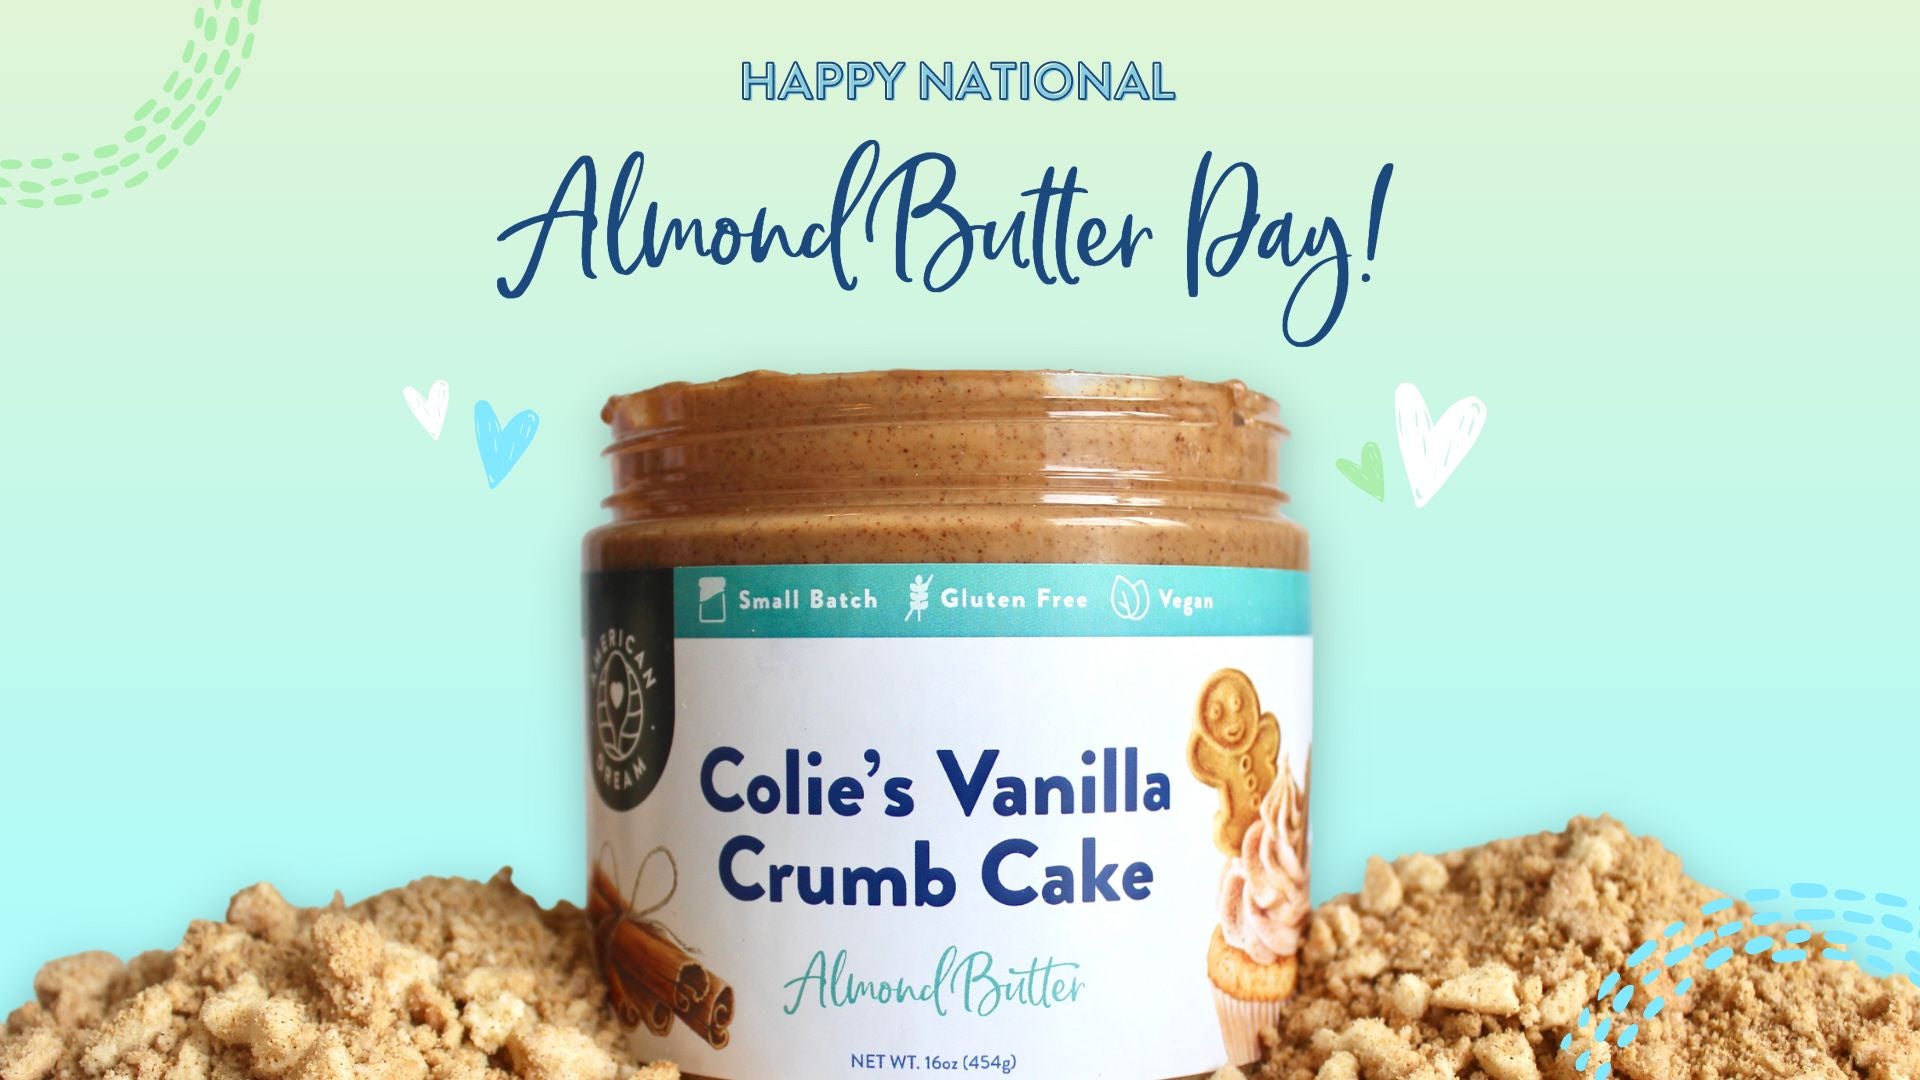 National Almond Butter Day!